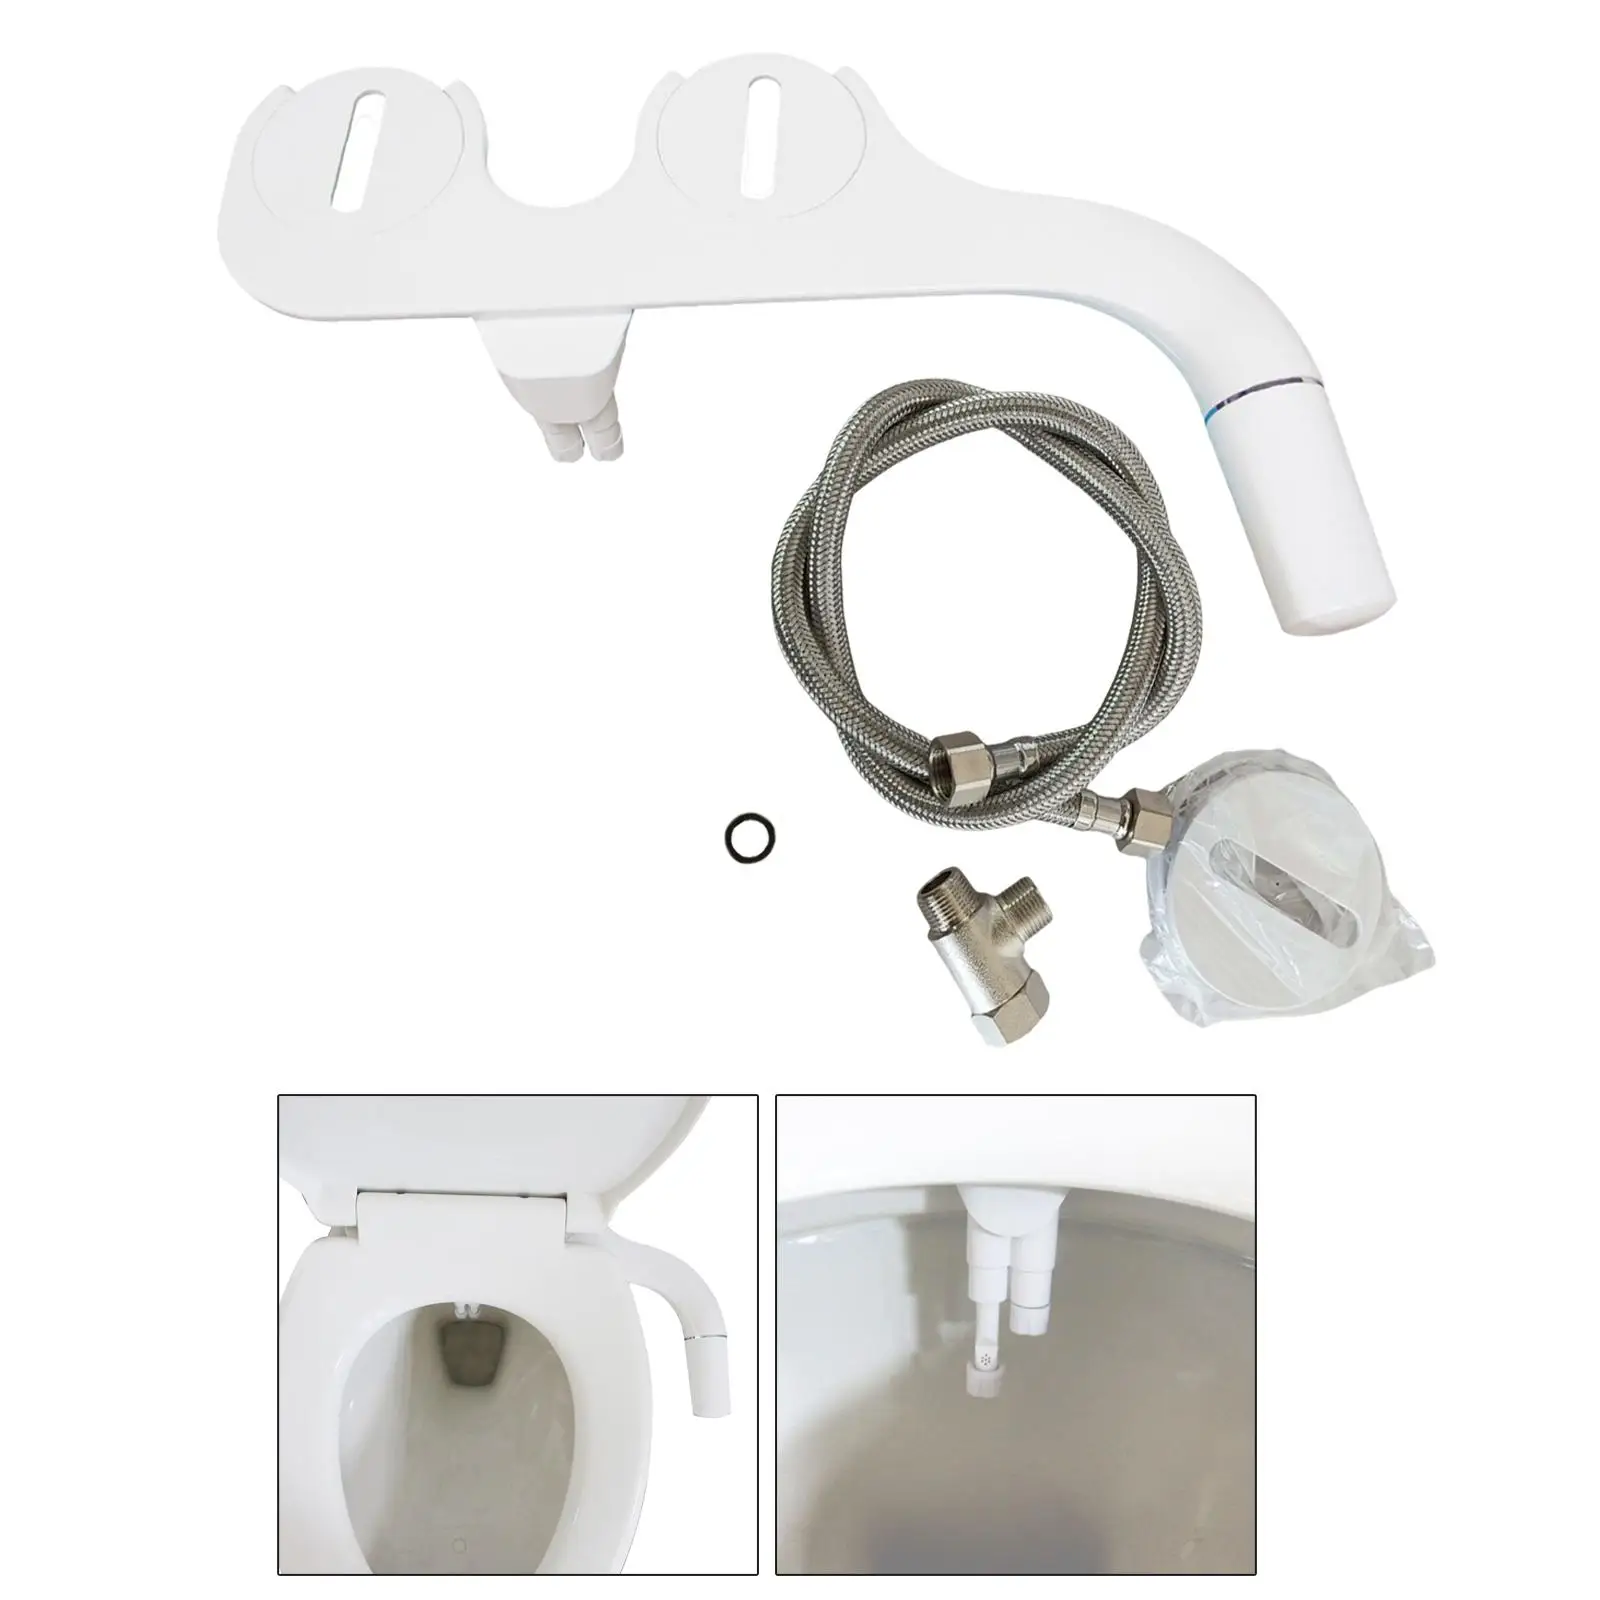 Houehold Bidet Toilet Seat Attachment Mechanical   Water Sprayer Washer Self Cleaning Nozzle Clean Sprayer for Toilet